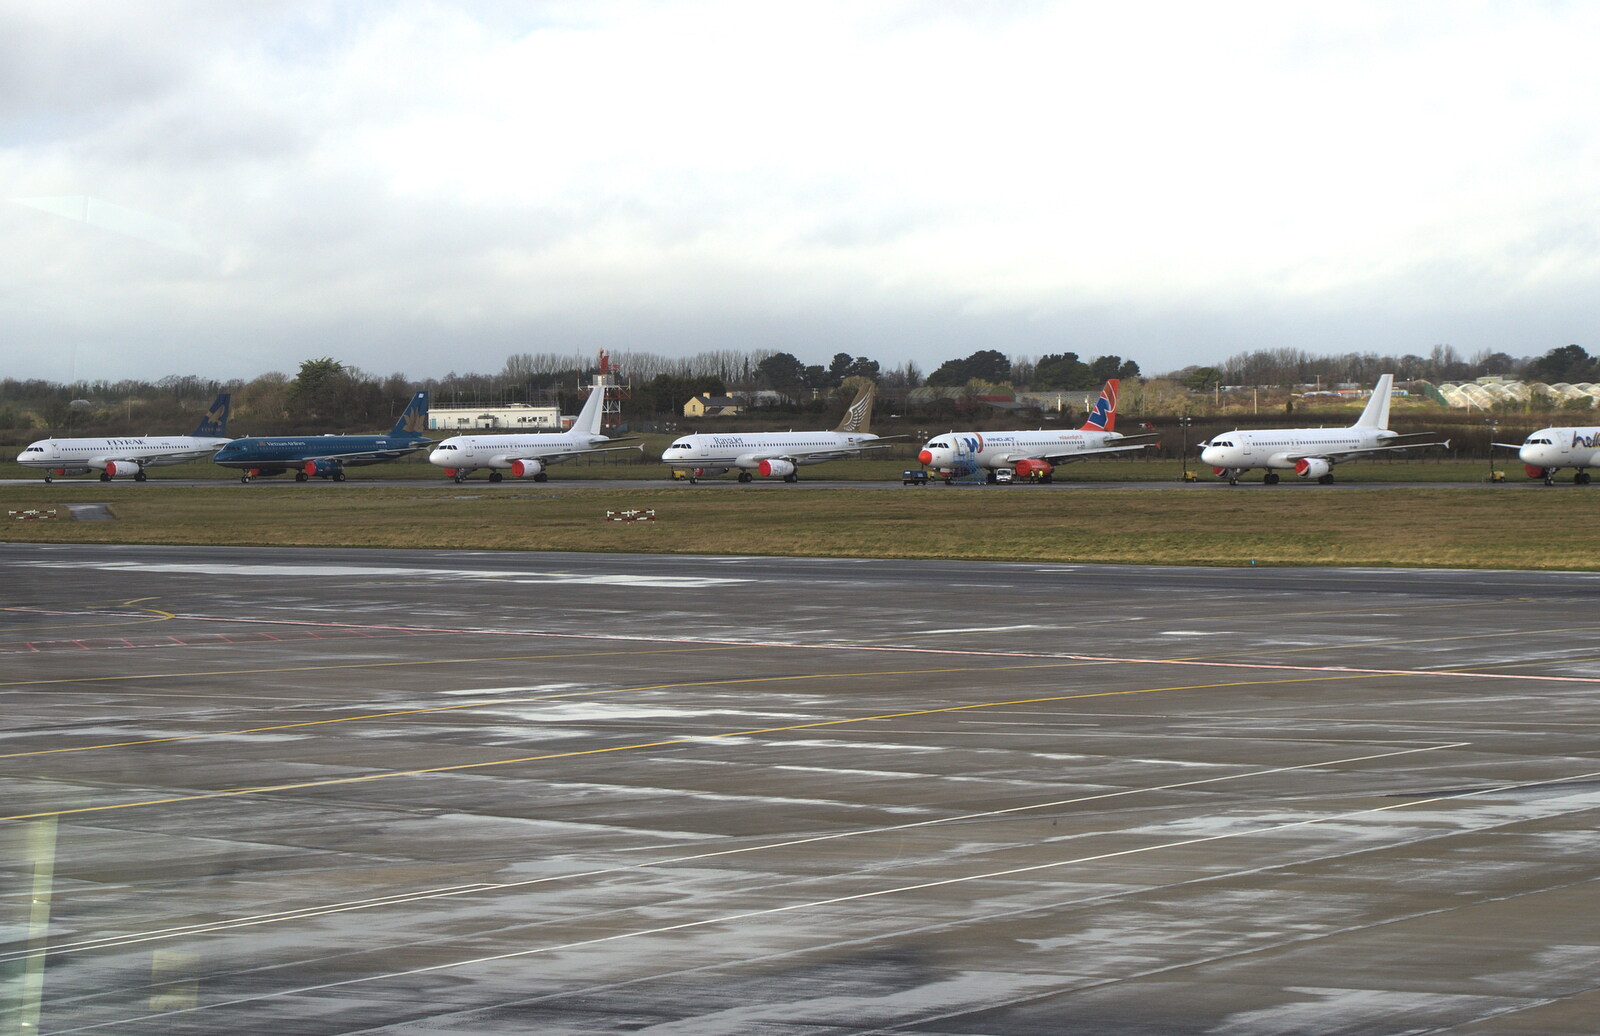 An unusual sight of lots of carriers' planes from A Pre-Christmas Dinner, Monkstown, Dublin - 16th December 2012